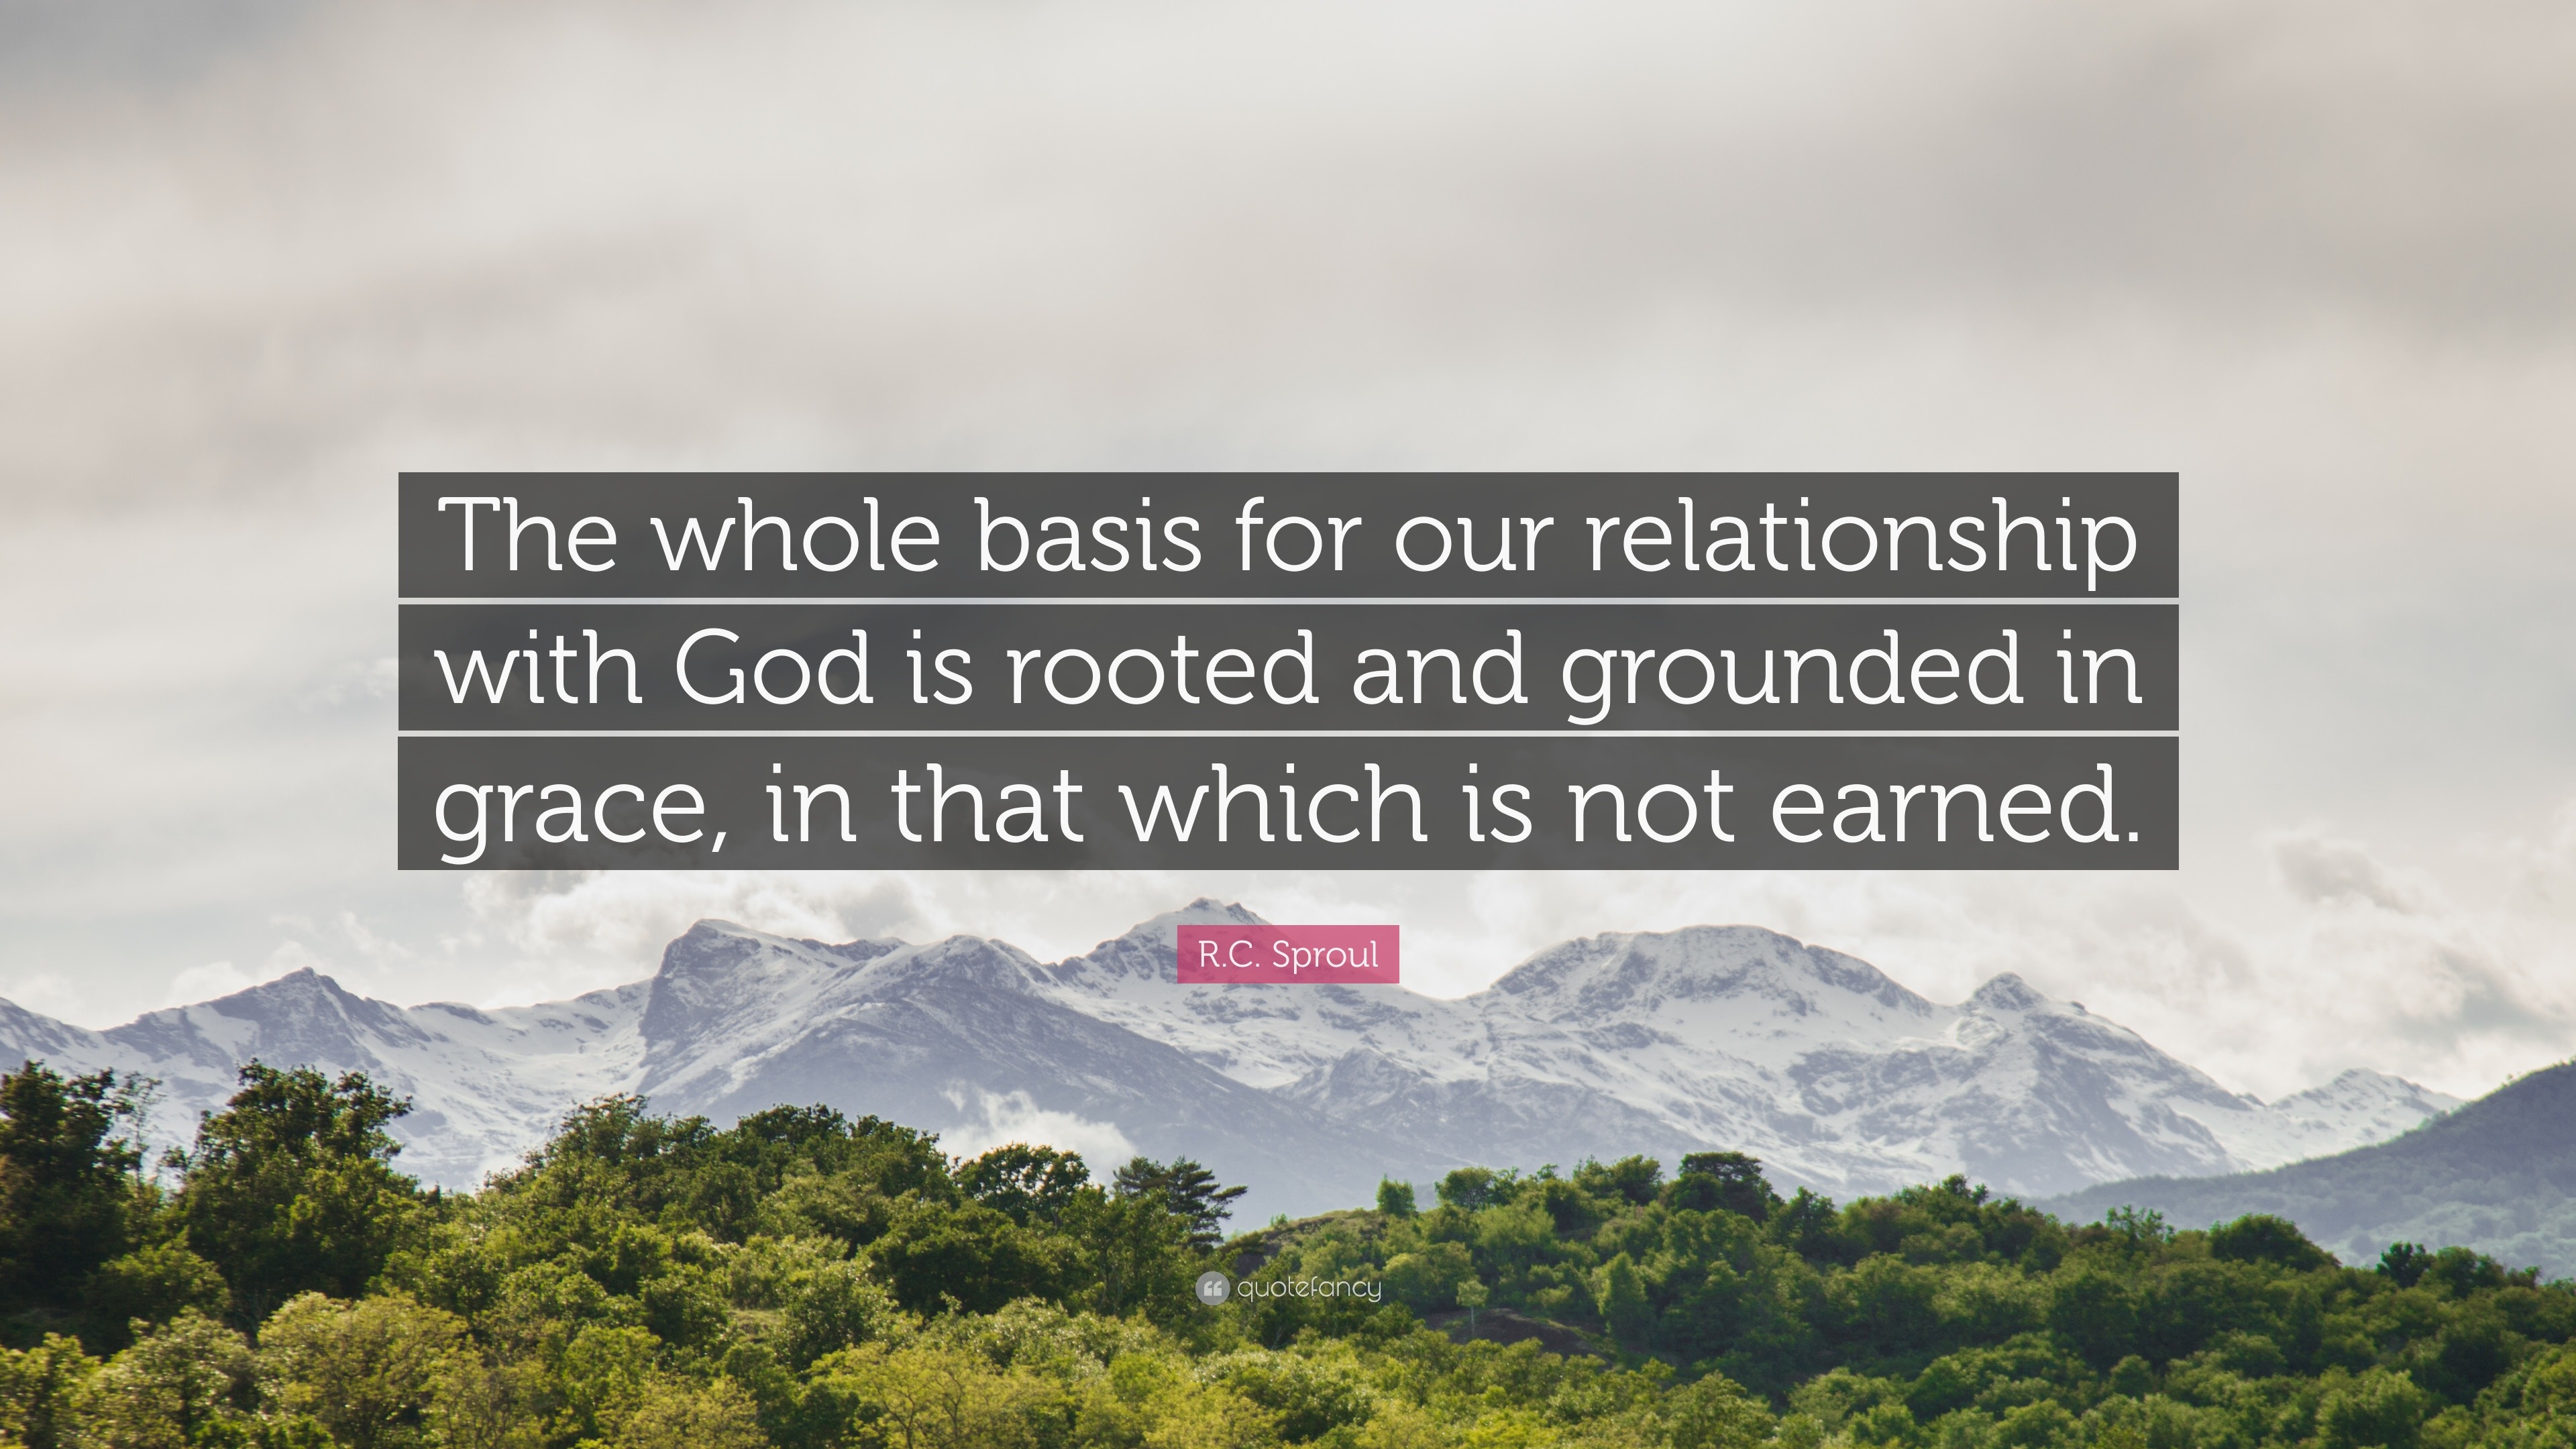 R C Sproul Quote The Whole Basis For Our Relationship With God Is Rooted And Grounded In